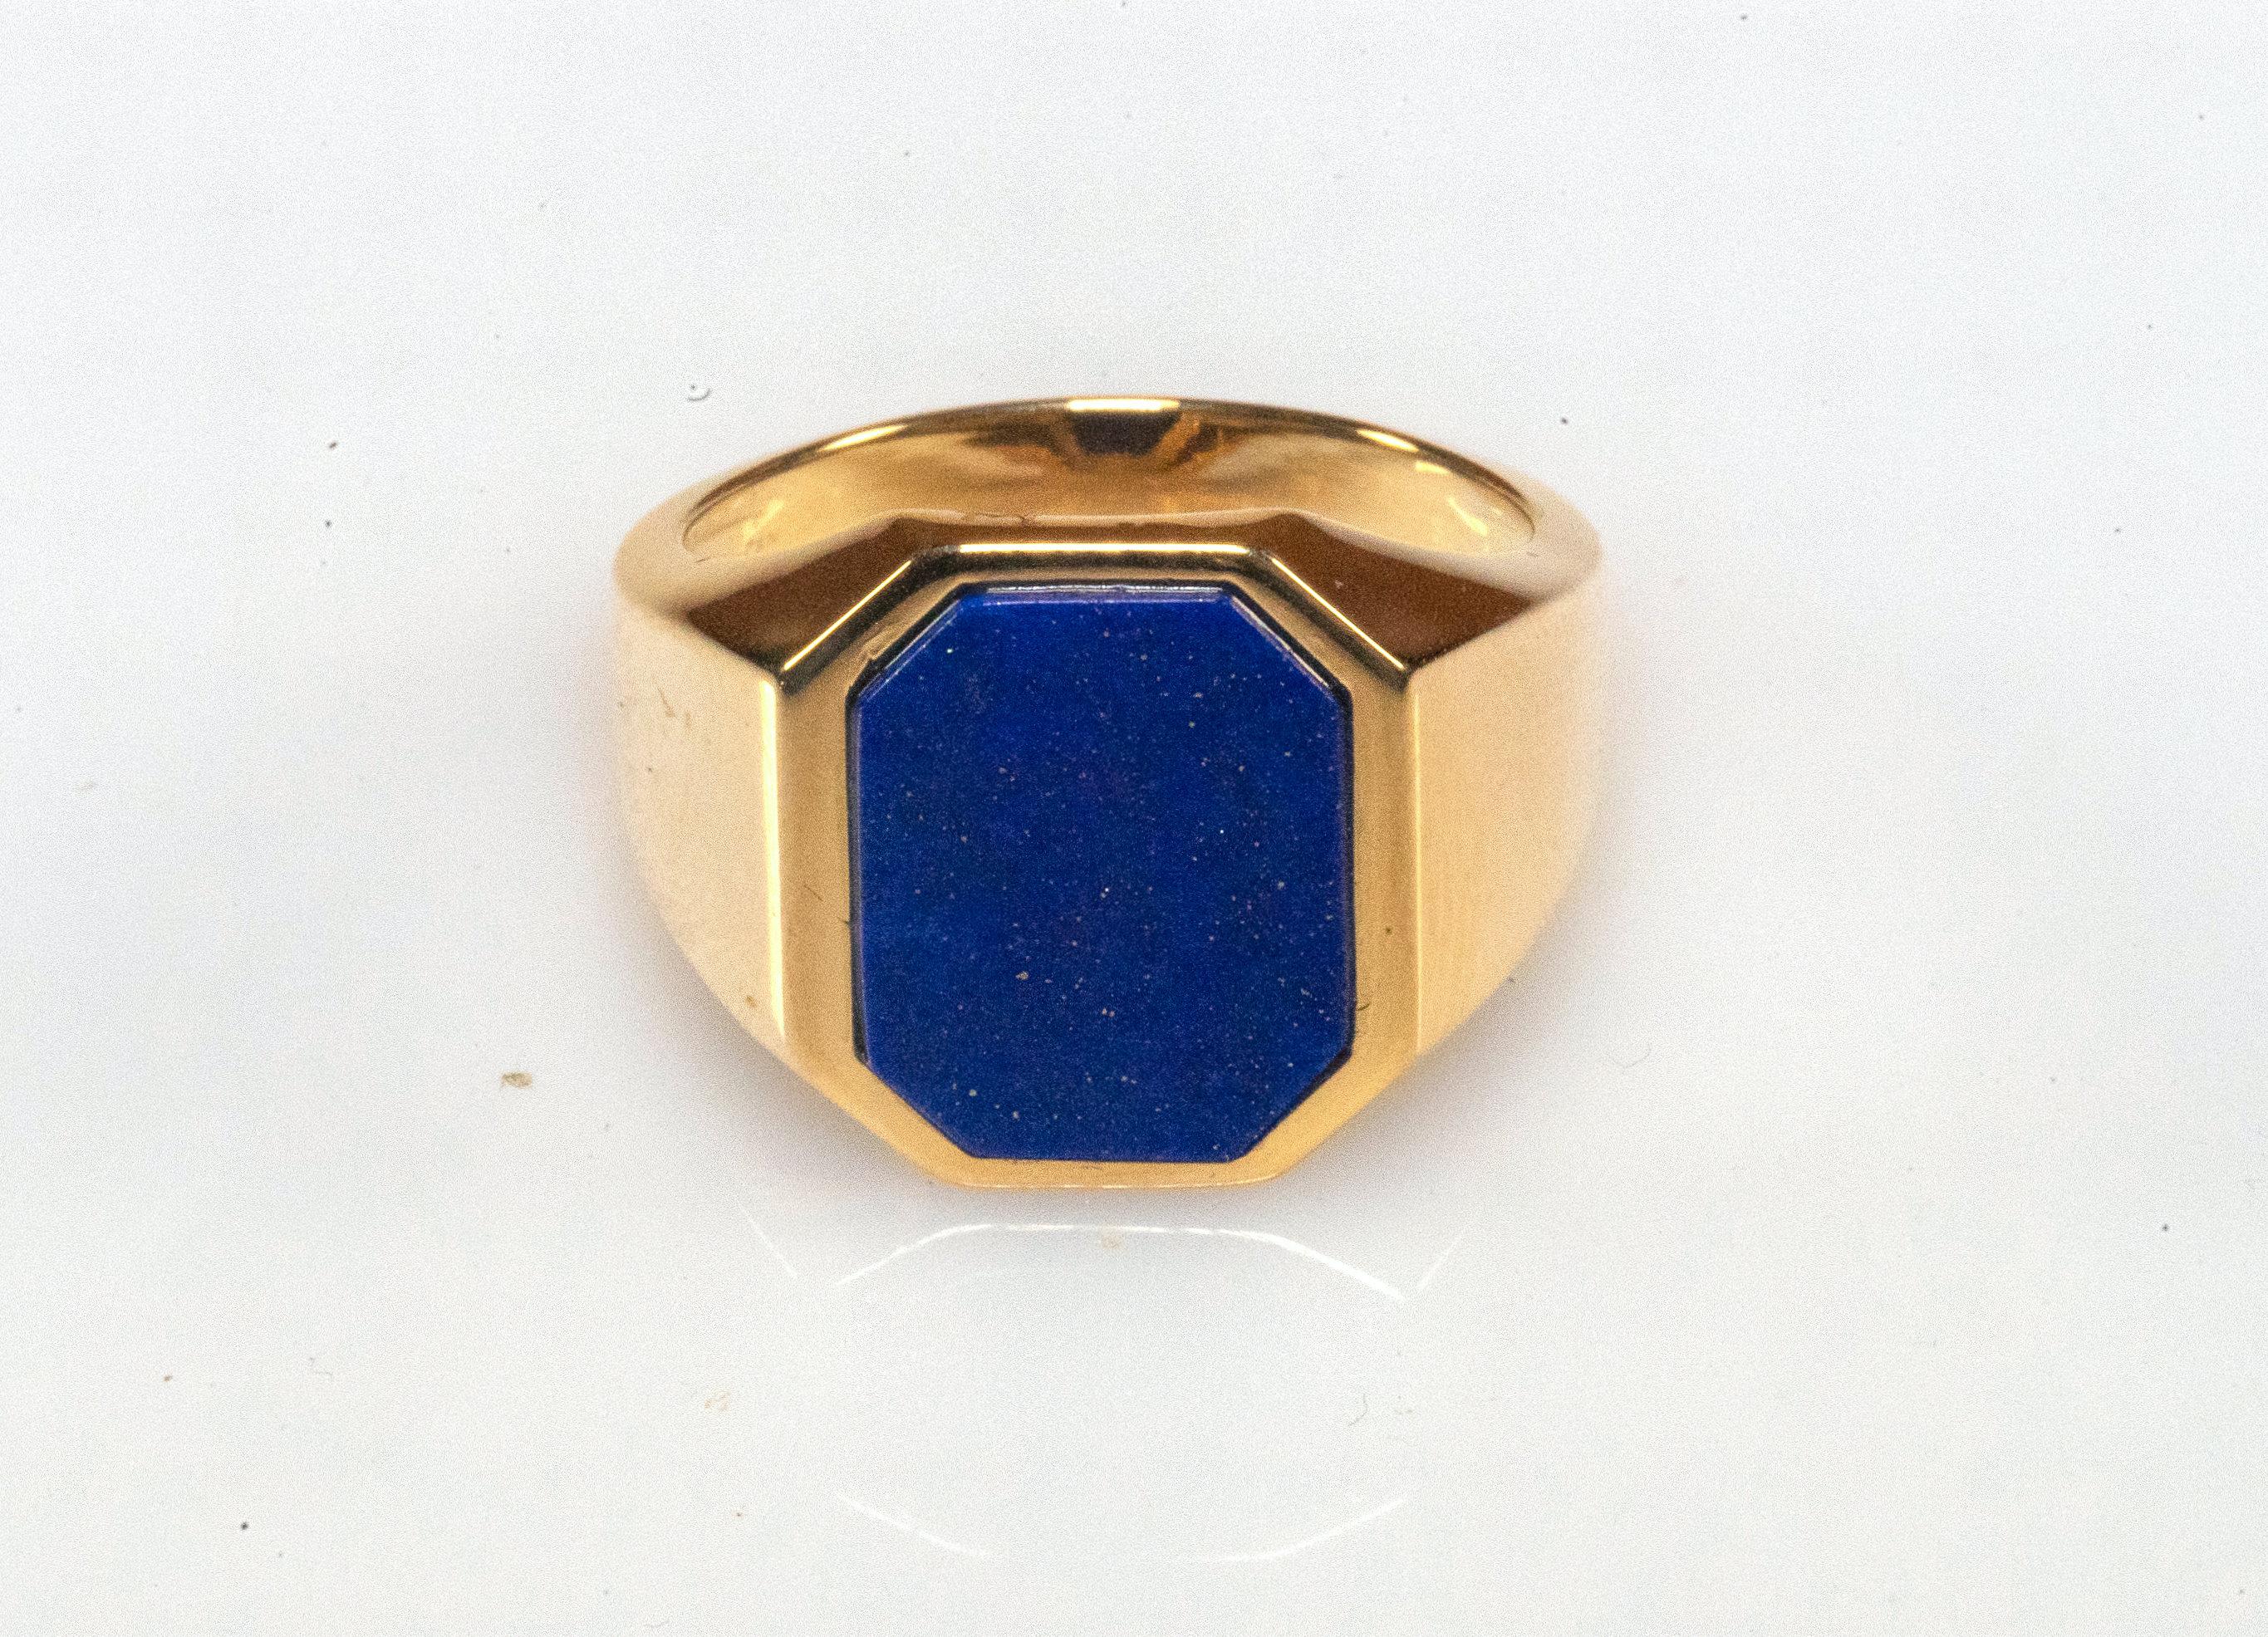 18 kt yellow gold men's ring with beautiful octagonal lapis lazuli of an intense blue color.
Inside the stone you can see small golden fragment due to the presence of pyrite, which makes the stone and the ring particularly rare and precious.
The